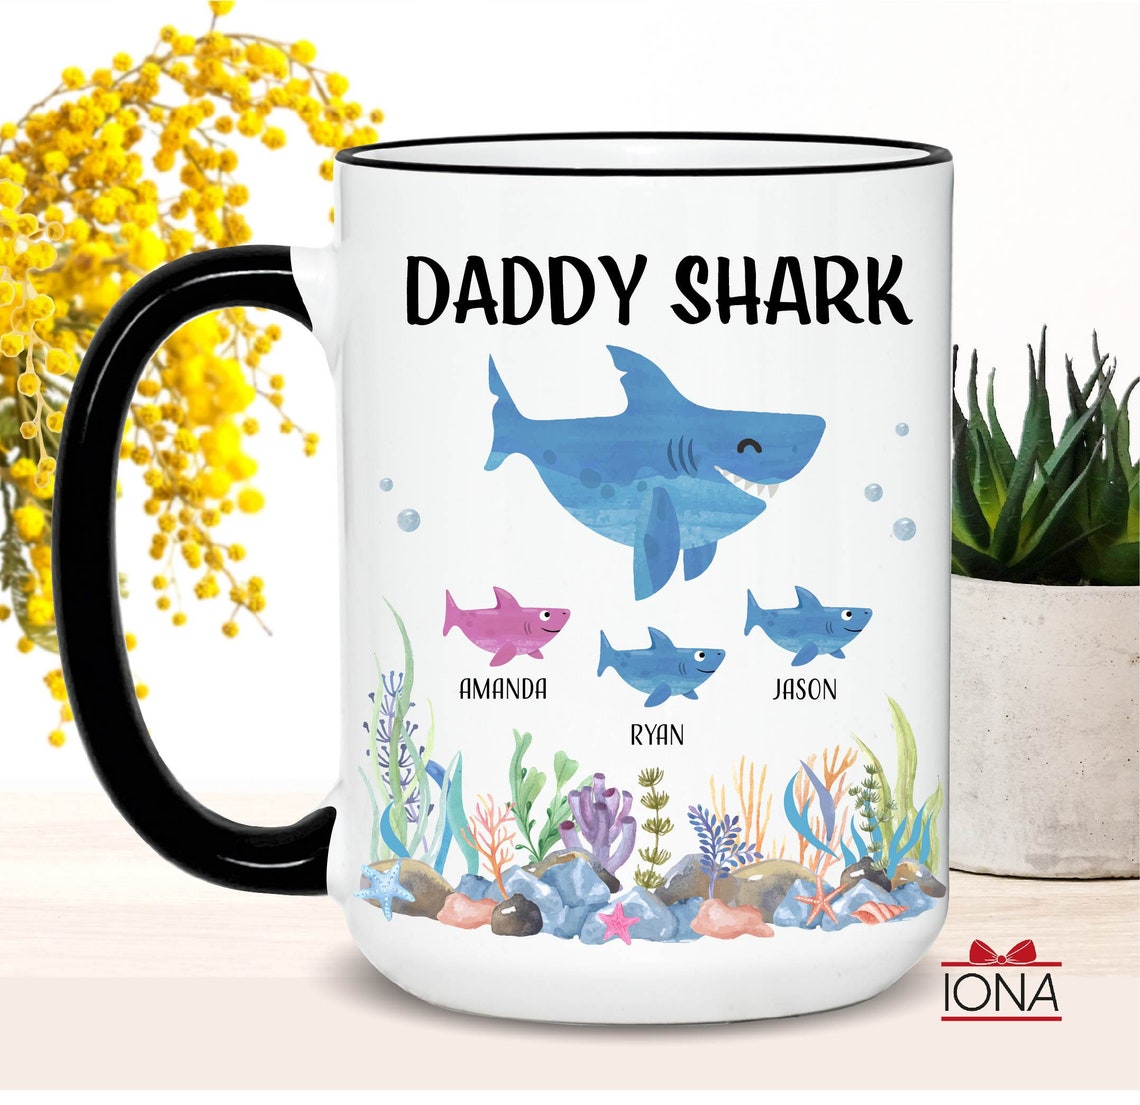 Daddy Shark Gift - Personalized Gift for Dad for Father’s Day - Dad Birthday Gift Tea Cup- Custom Dad Mug - Best Dad Coffee Mug